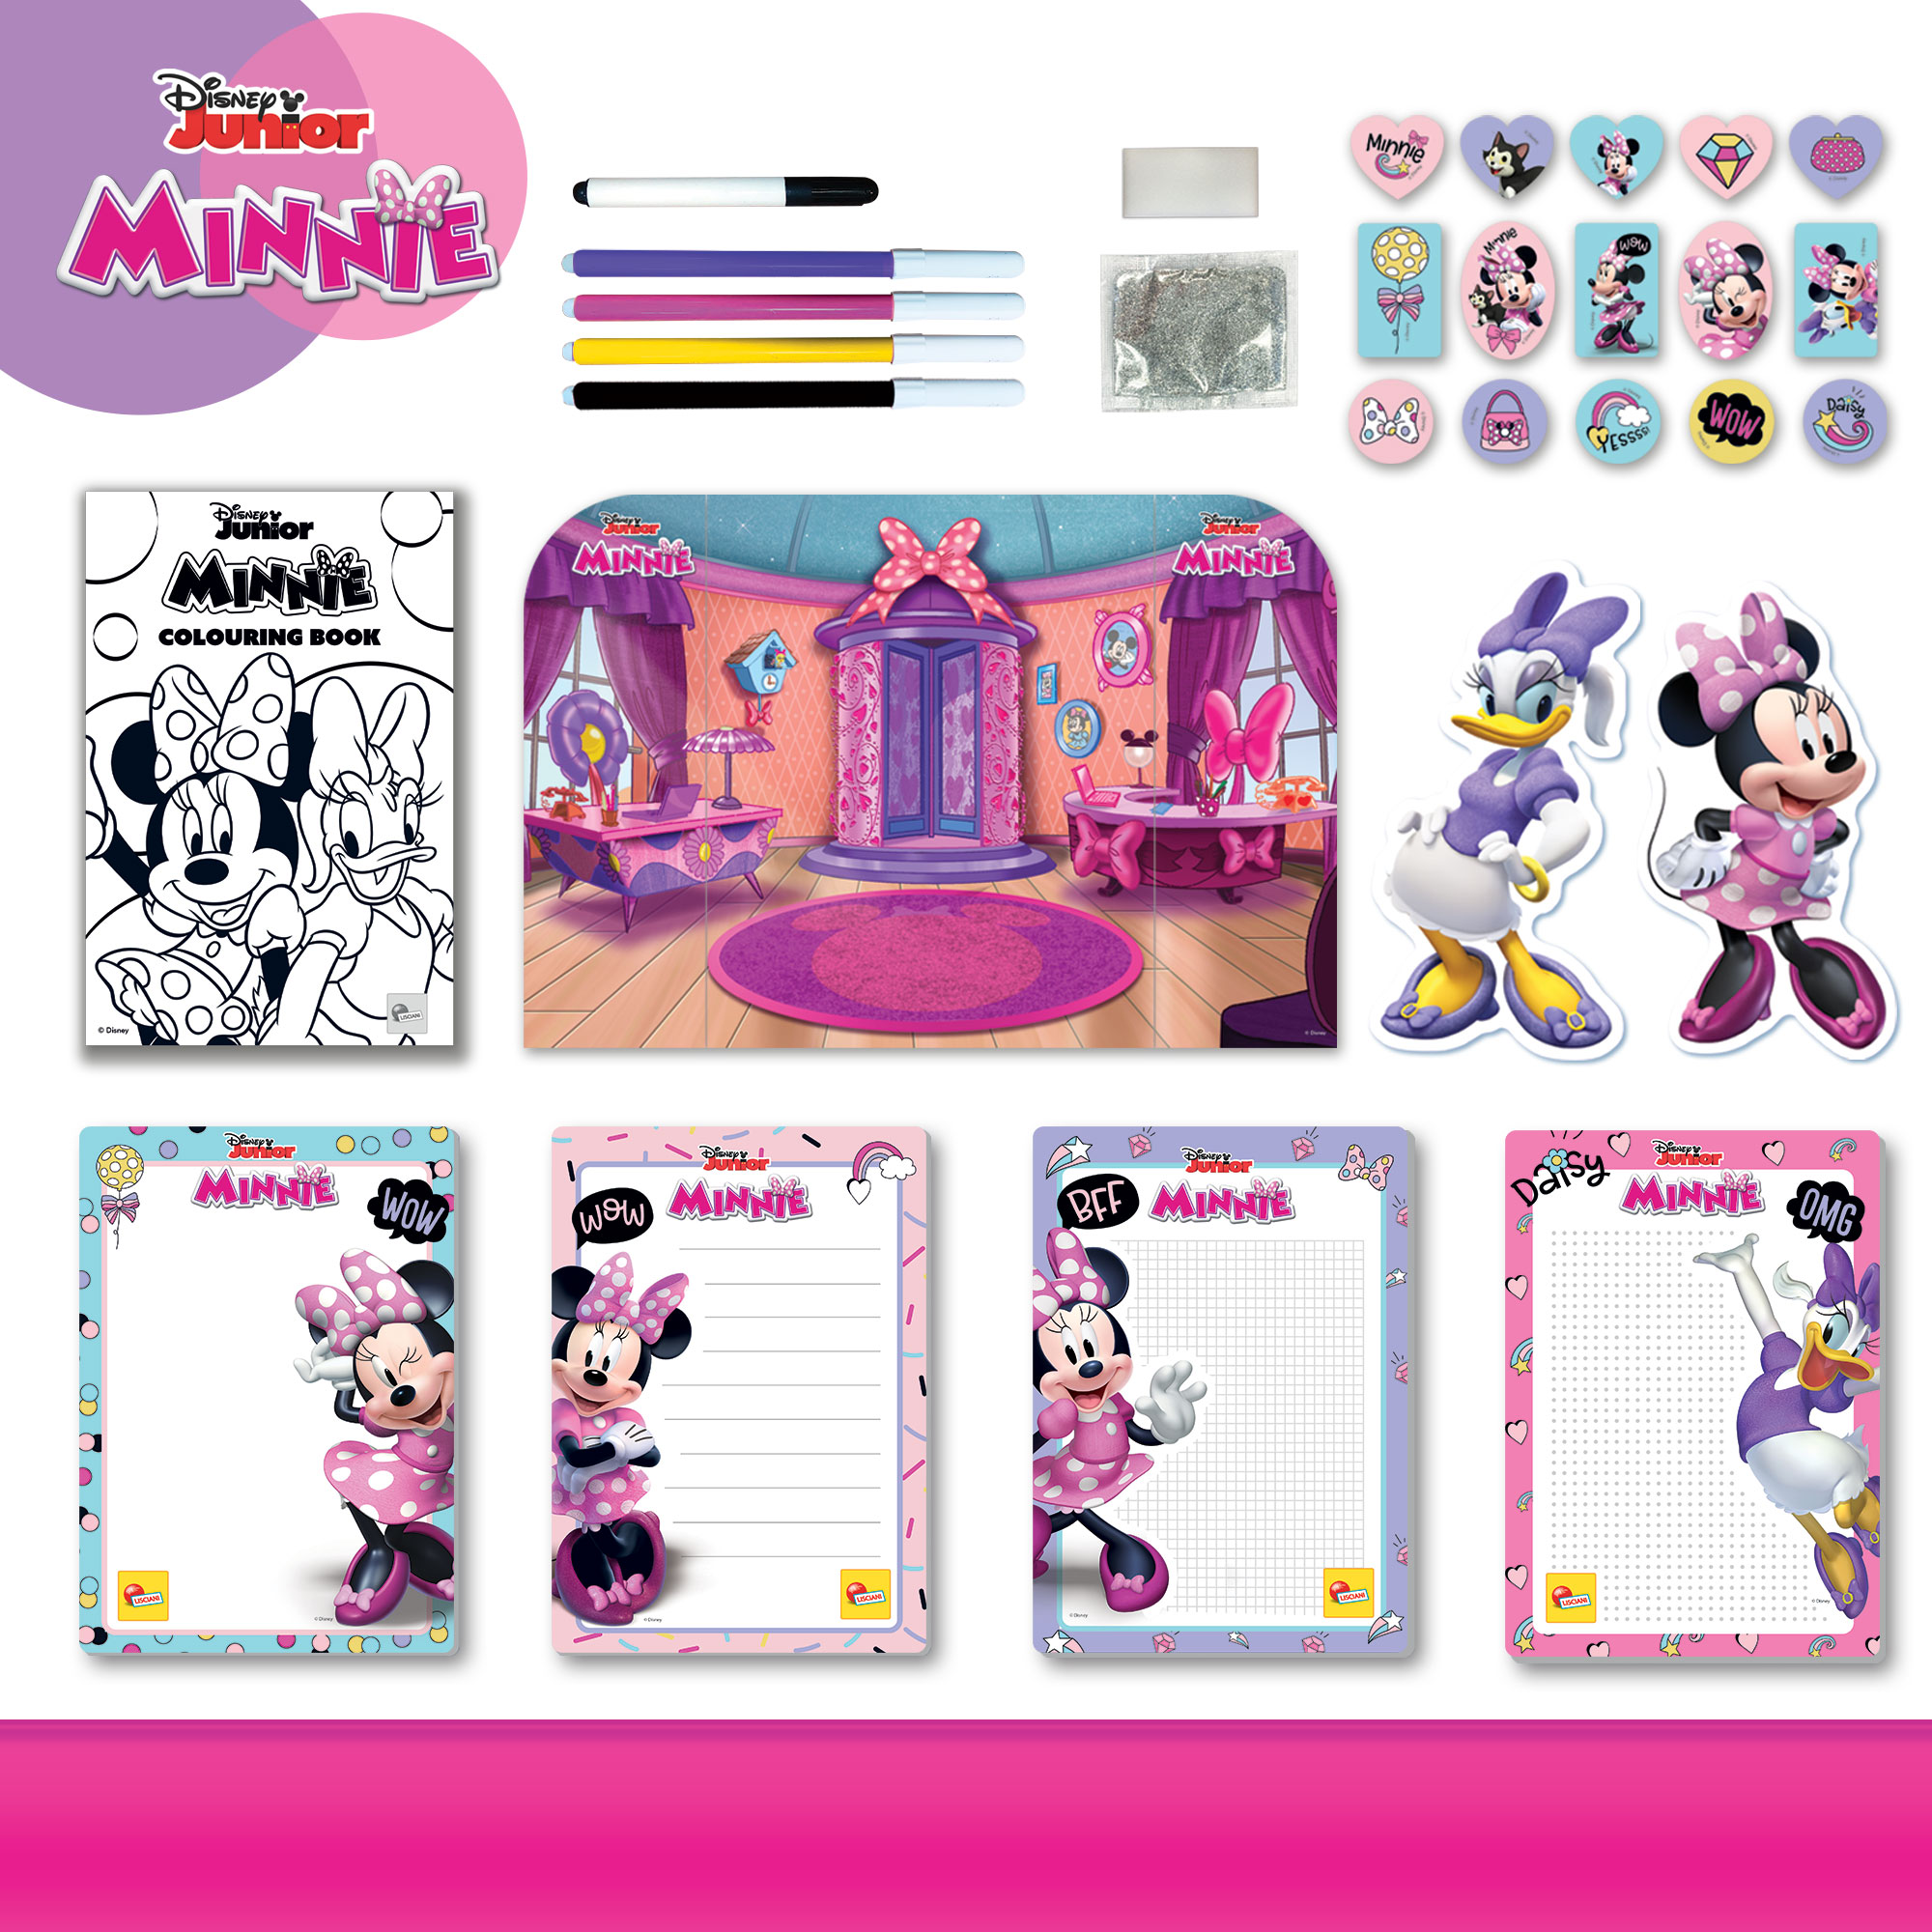 Photo 3 of the game MINNIE ZAINETTO COLOURING AND DRAWING SCHOOL